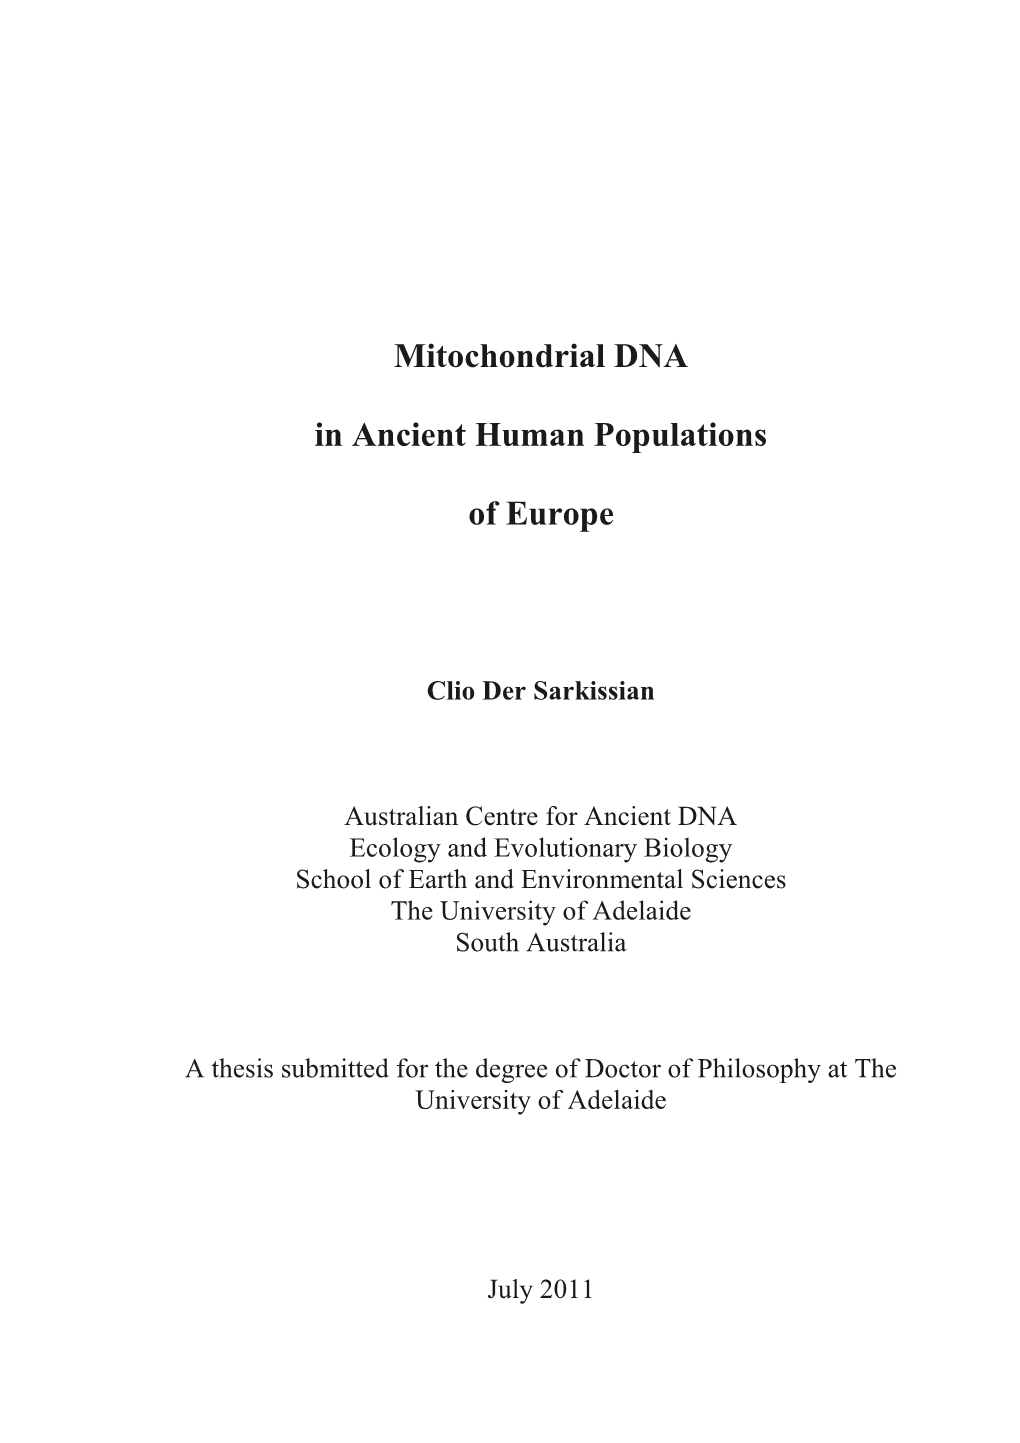 Mitochondrial DNA in Ancient Human Populations of Europe